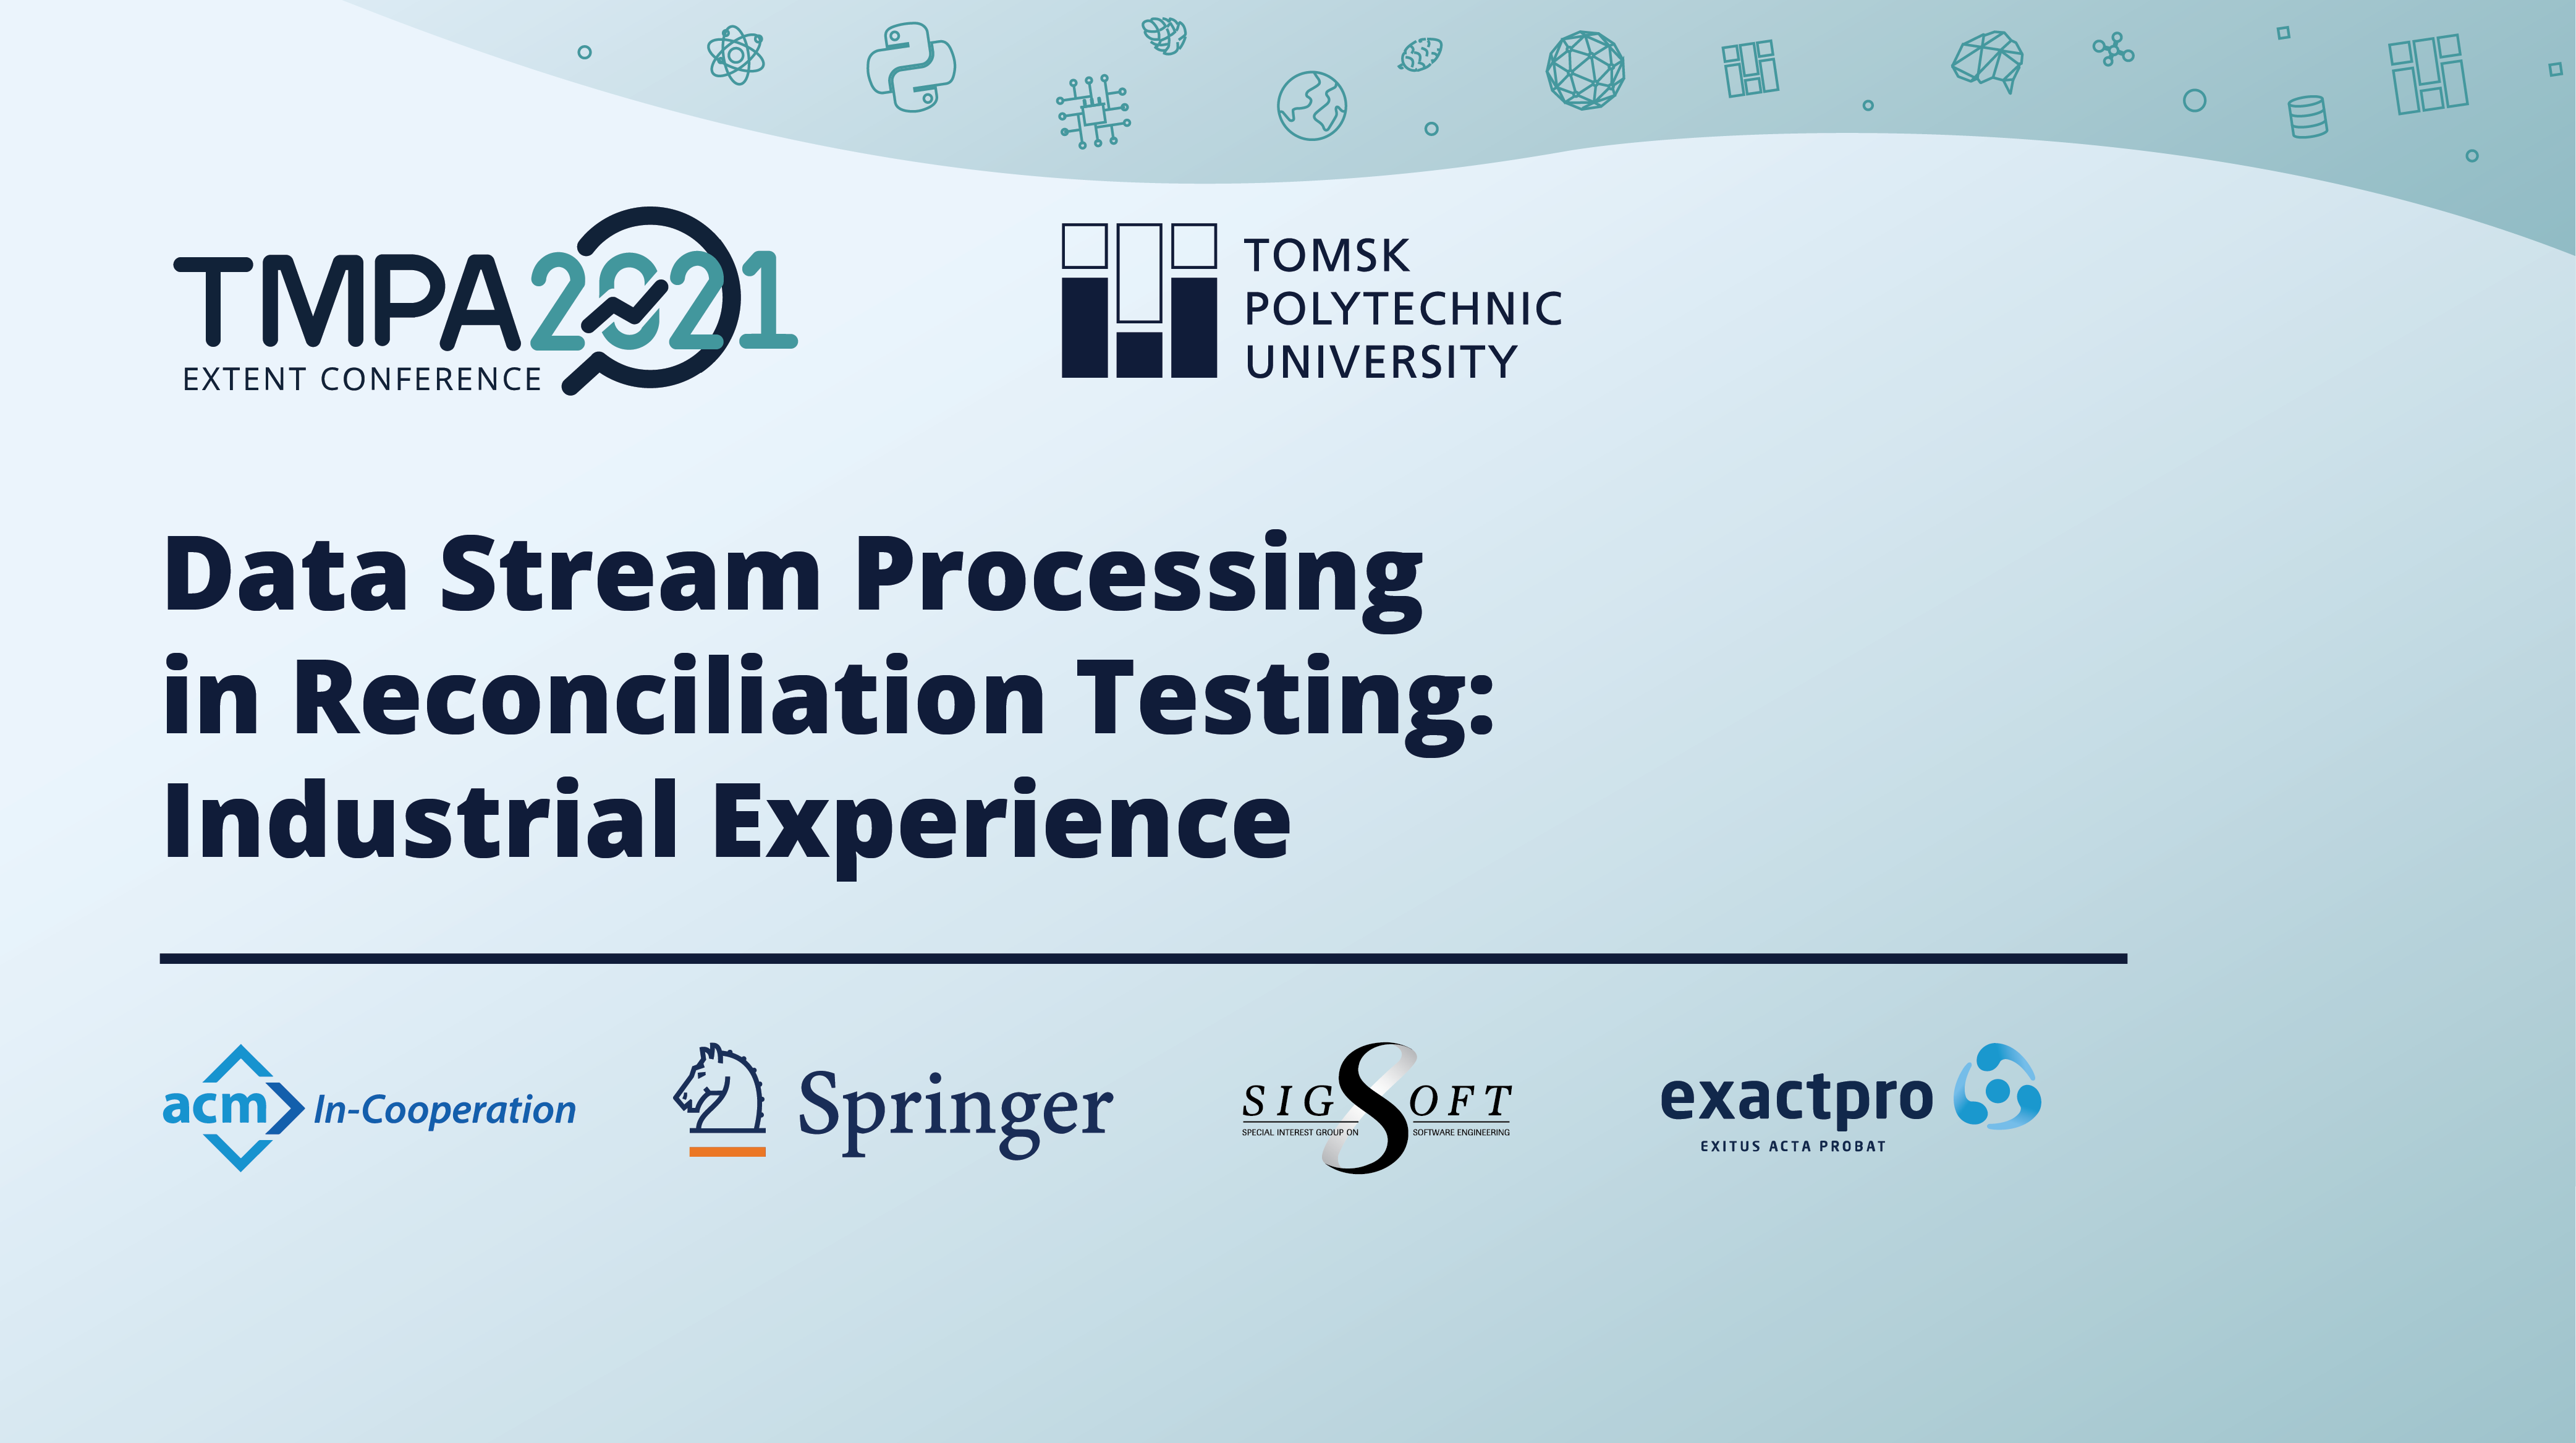 Data Stream Processing in Reconciliation Testing: Industrial Experience